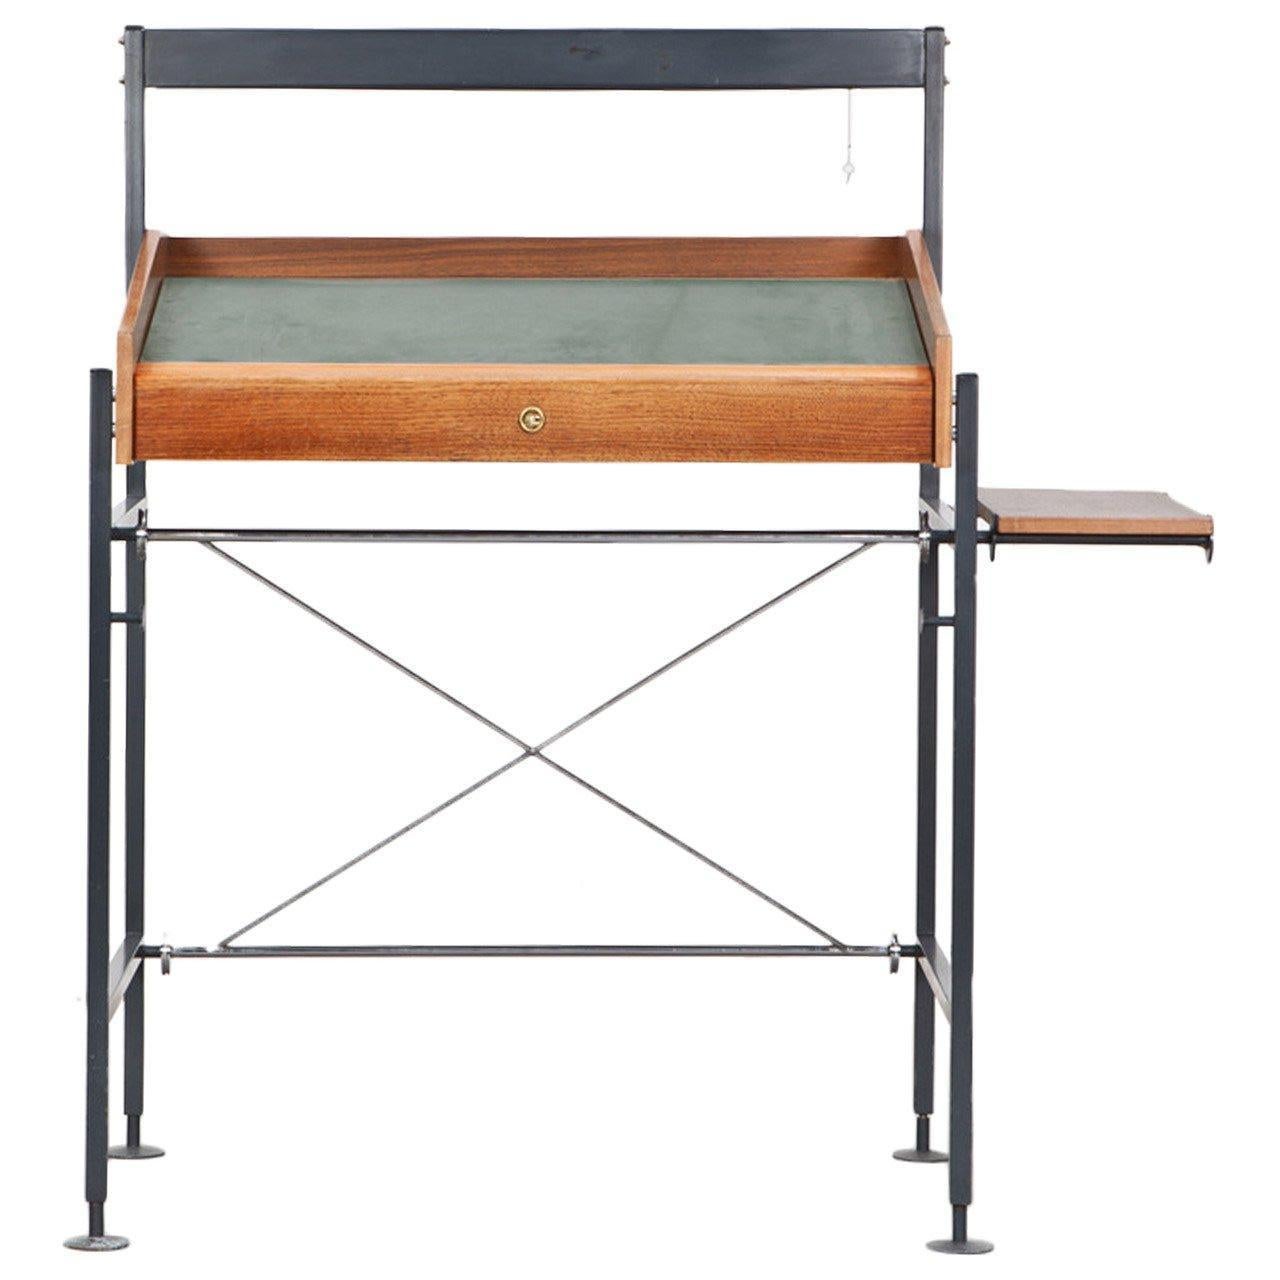 Rare Egon Eiermann stand-up desk made out of walnut, chromium-plated metal and lacquered metal. Under the writing surface is a storage space which is lockable with a key. In the upper metal frame light is installed and also a shelf on the side.